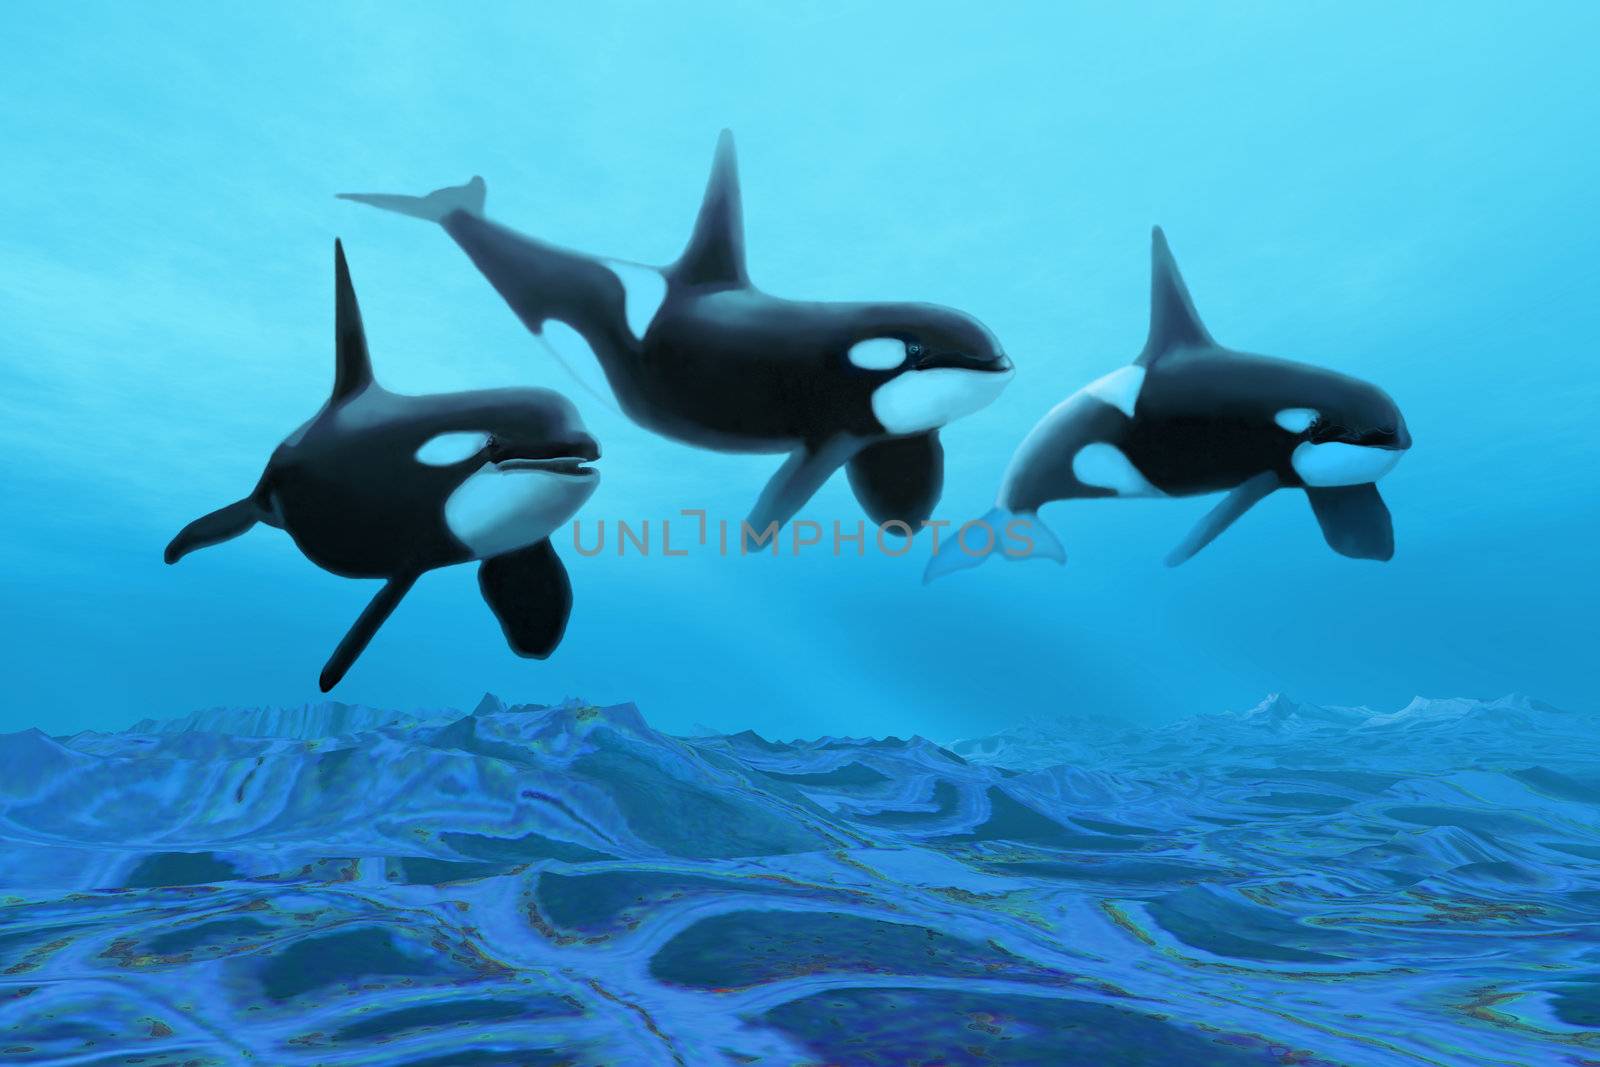 Three male Killer Whales swim over ancient fossil beds.